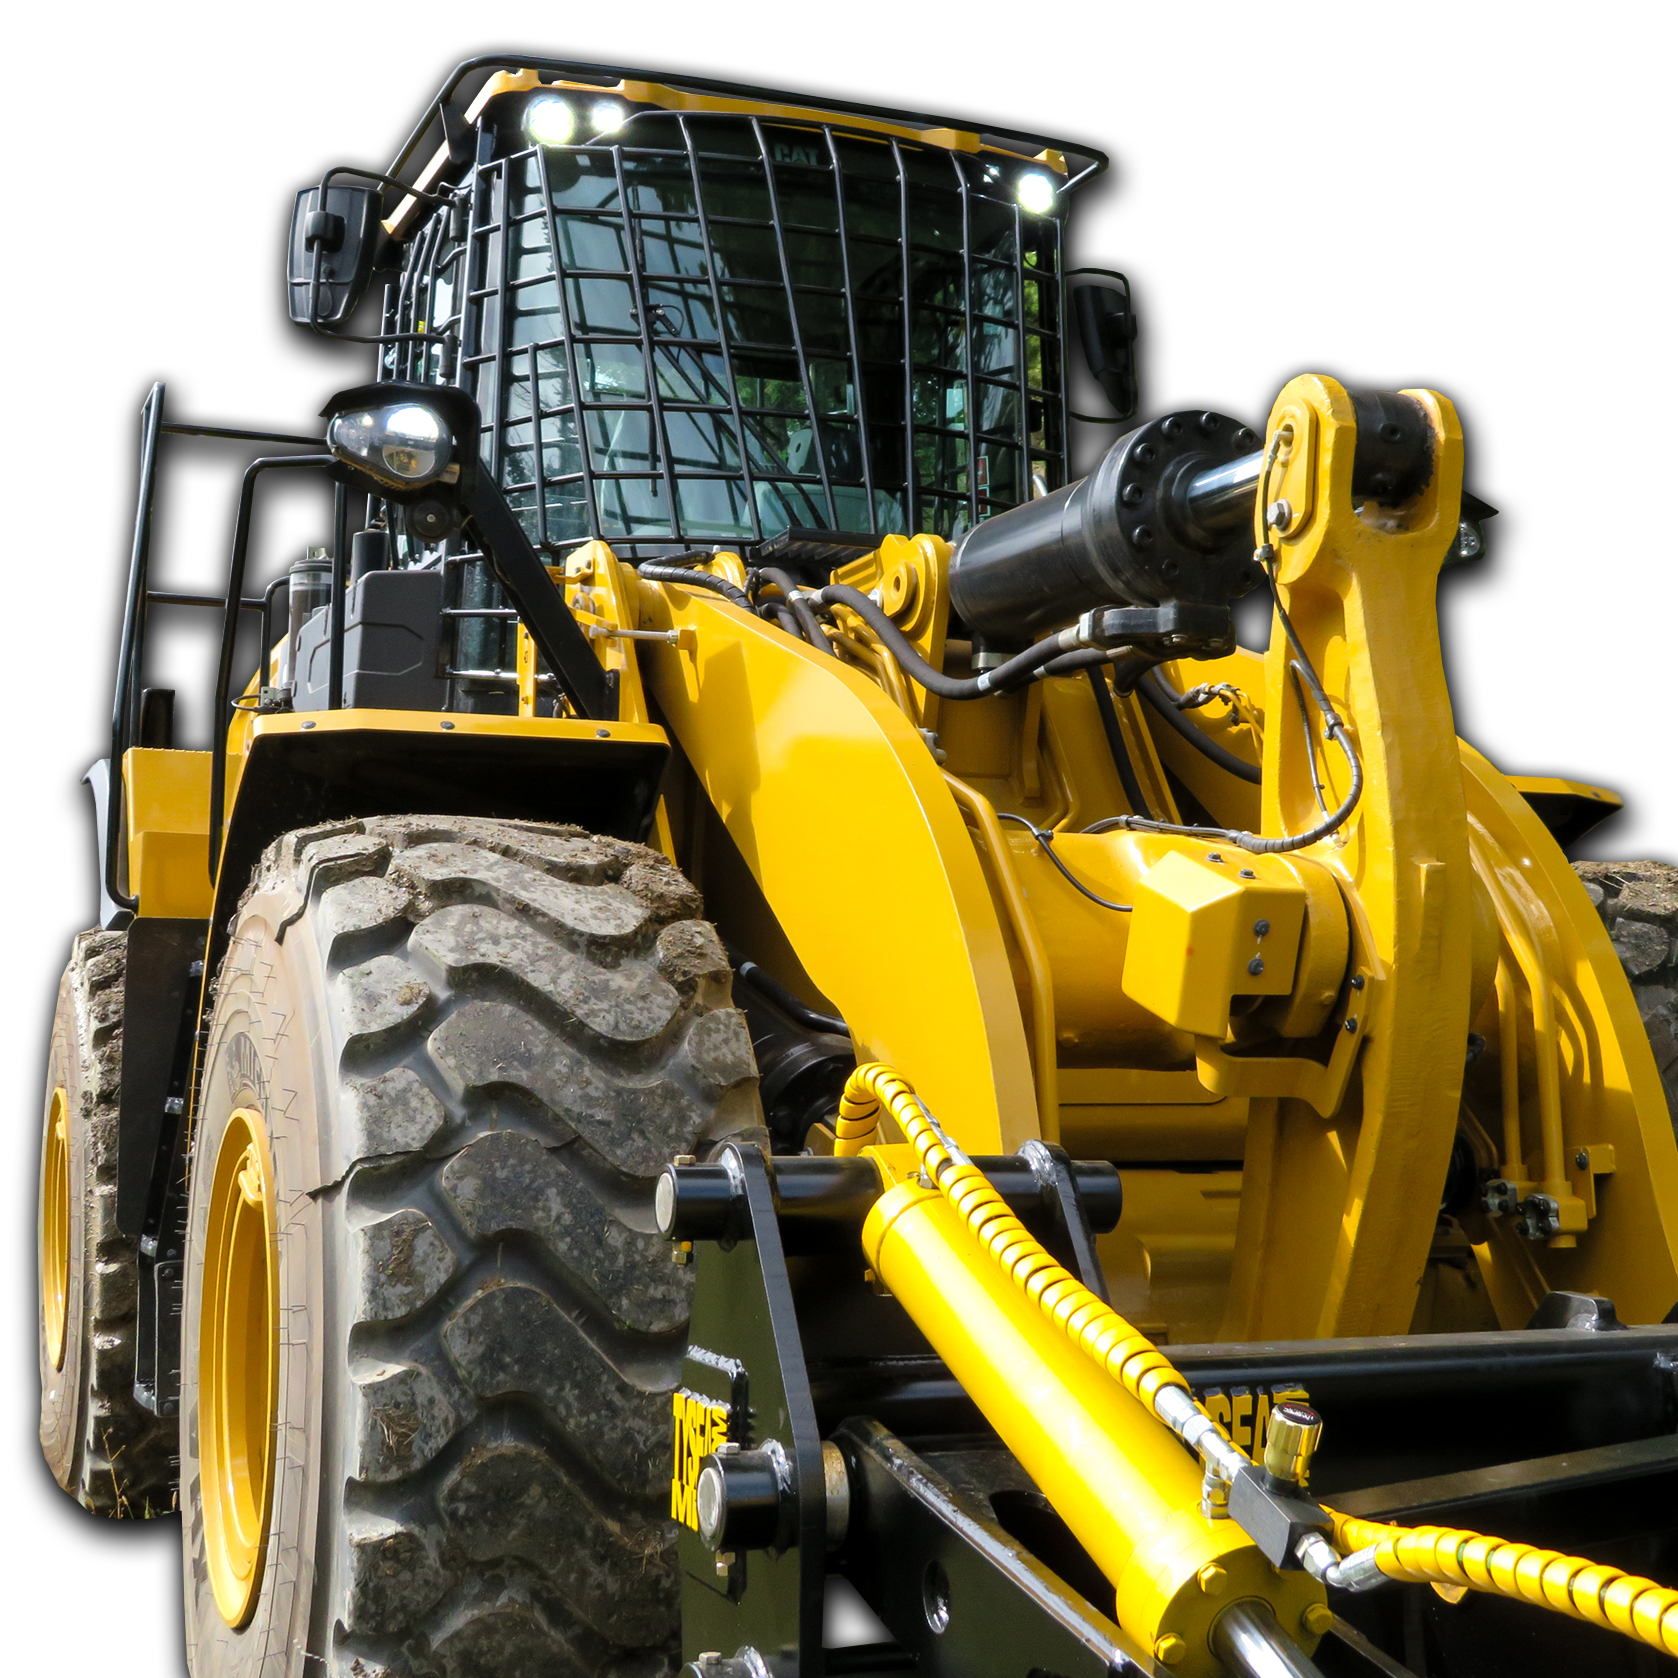 Wheel loader protective guarding for windows